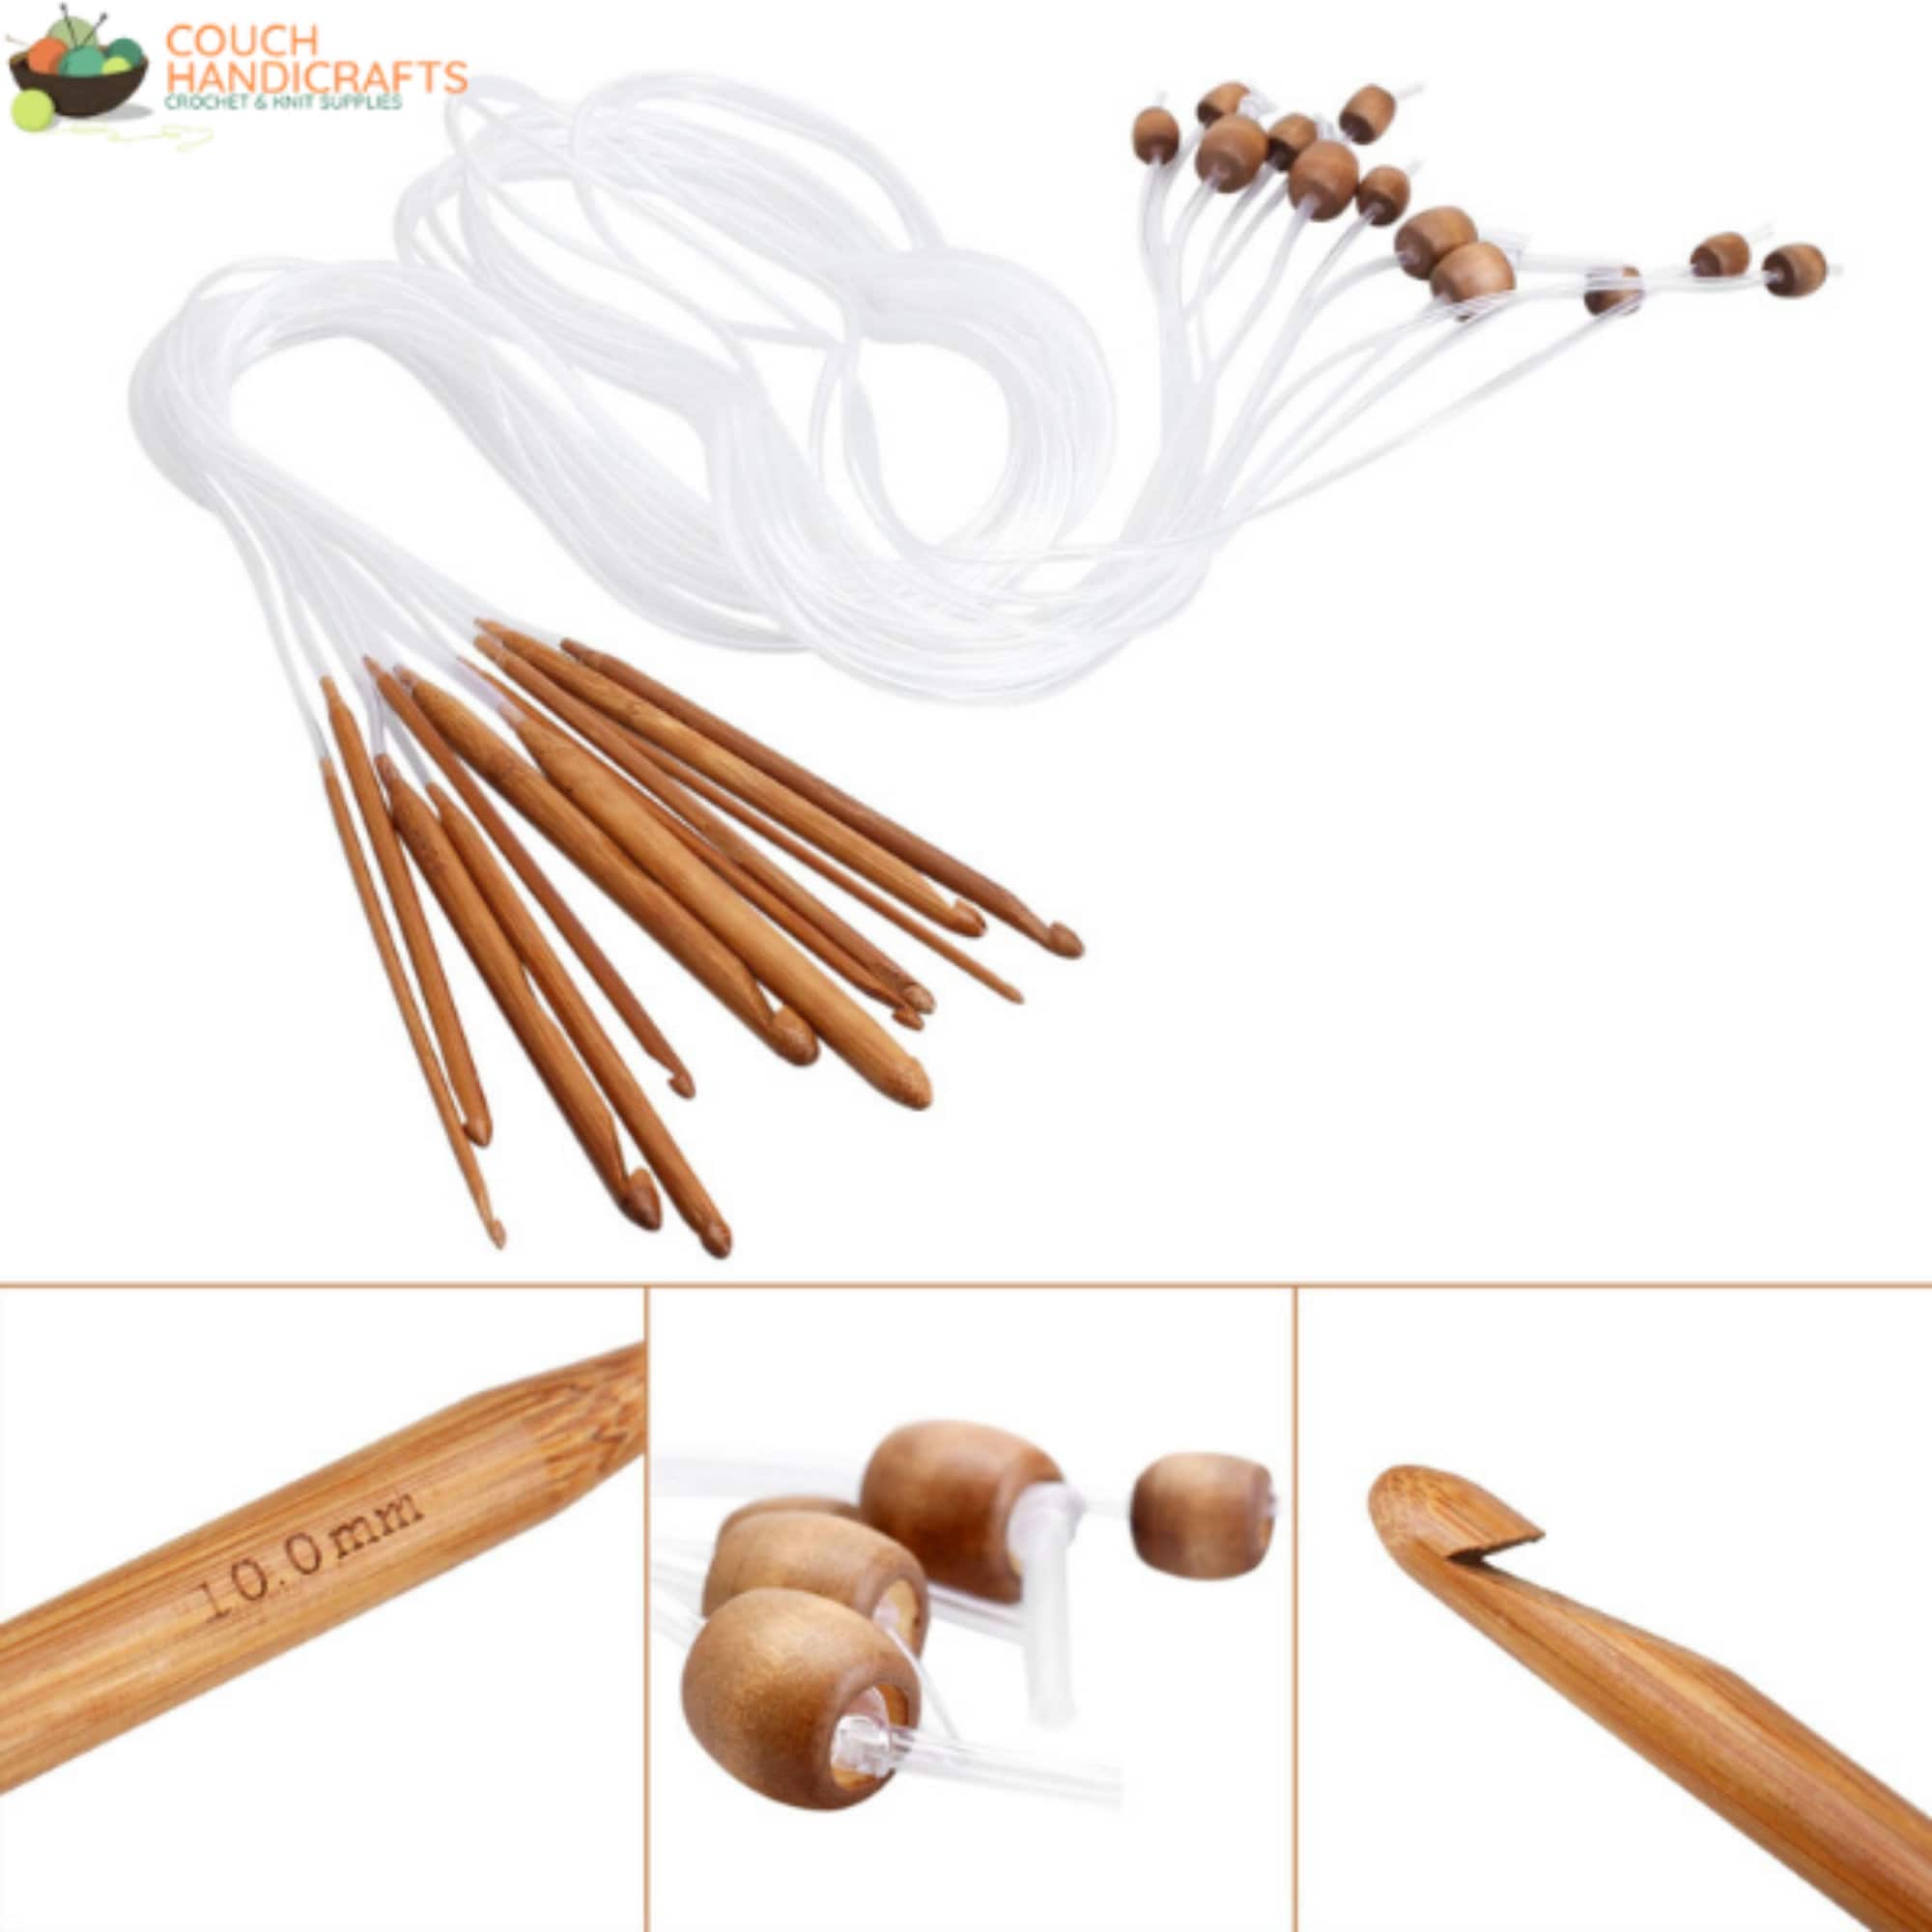 Buy Tunisian Crochet Hooks With Cable Chords, Wooden Hooks, Afghan Crochet,  Crochet Hook, Crochet Supplies, Crochet Accessories, Crochet Scarfs Online  in India 